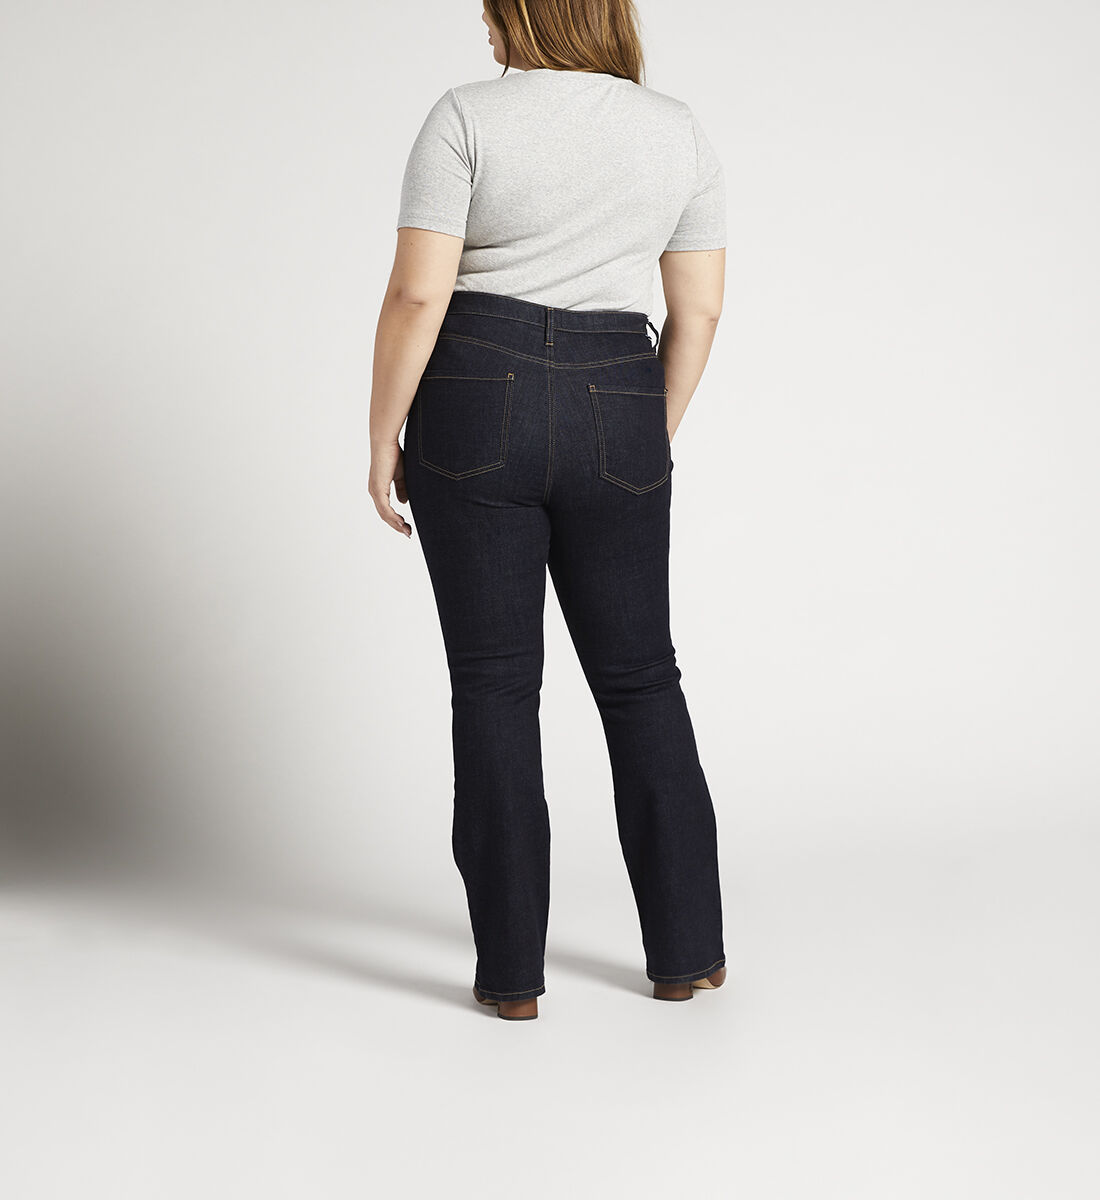 Phoebe High Rise Bootcut Jeans Plus Size Back